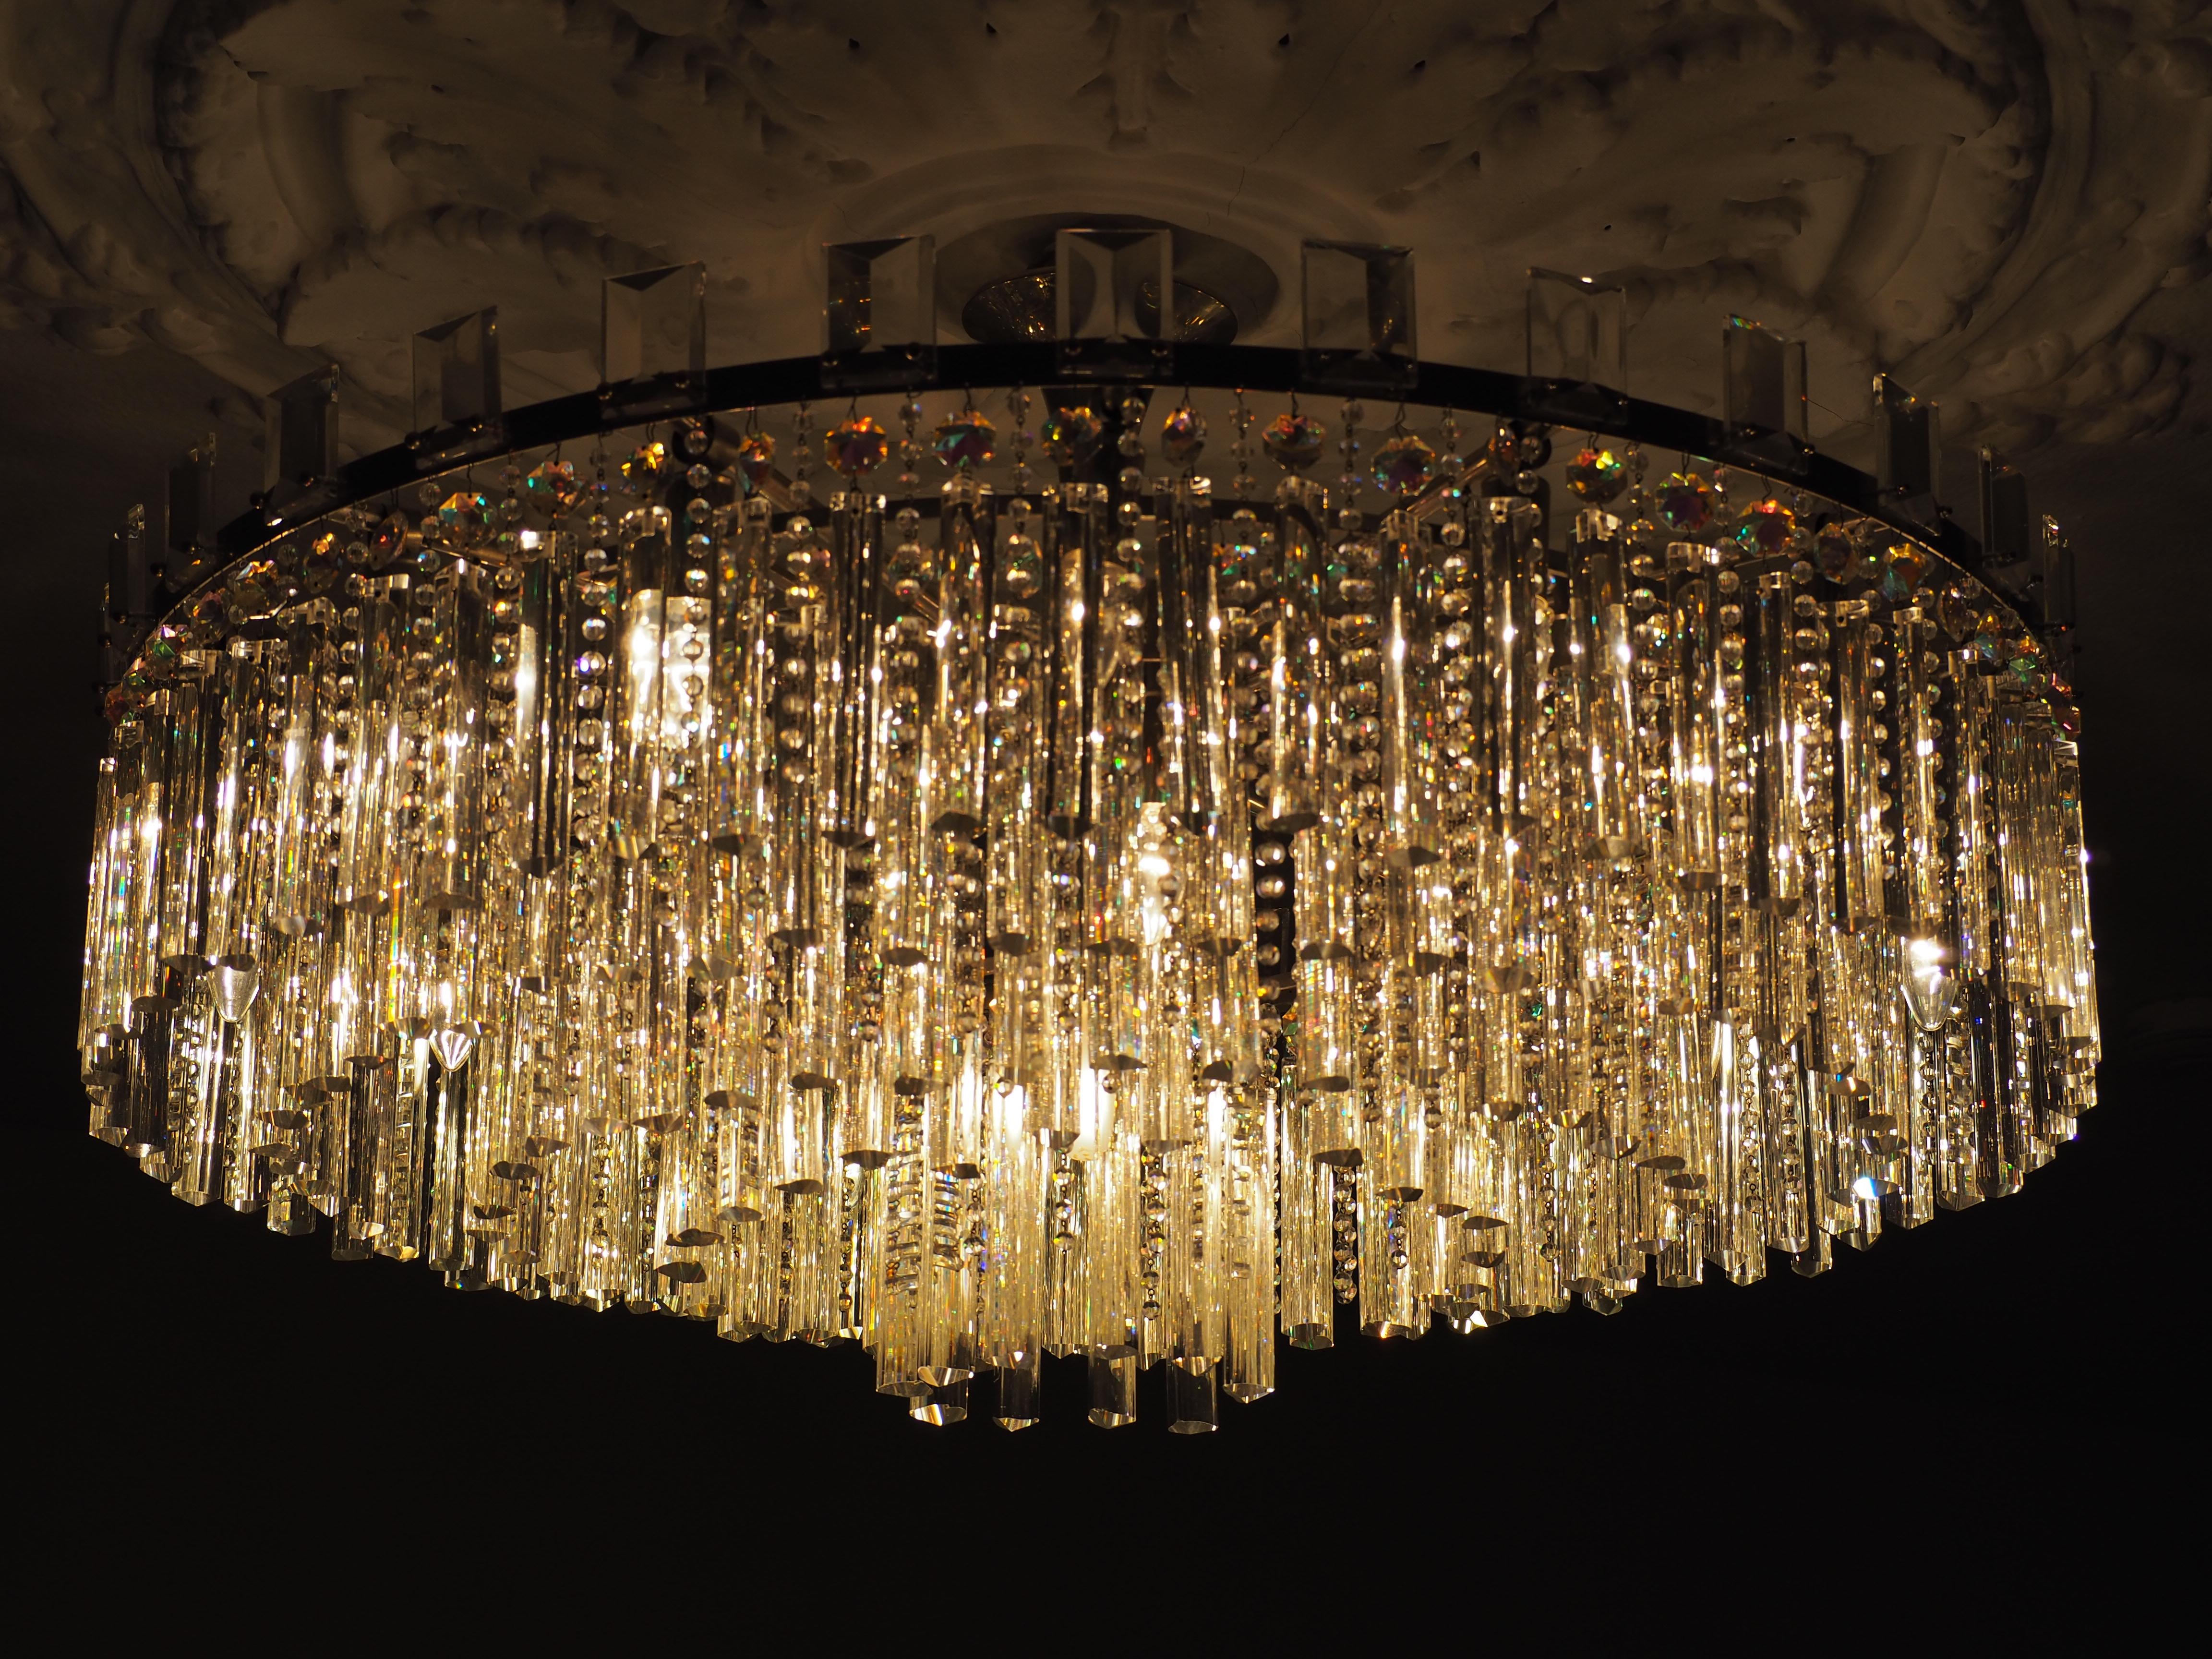 Austrian Stunning Set of Haevy Cut Glass and Nickel Chandeliers by Palwa, circa 1960s For Sale